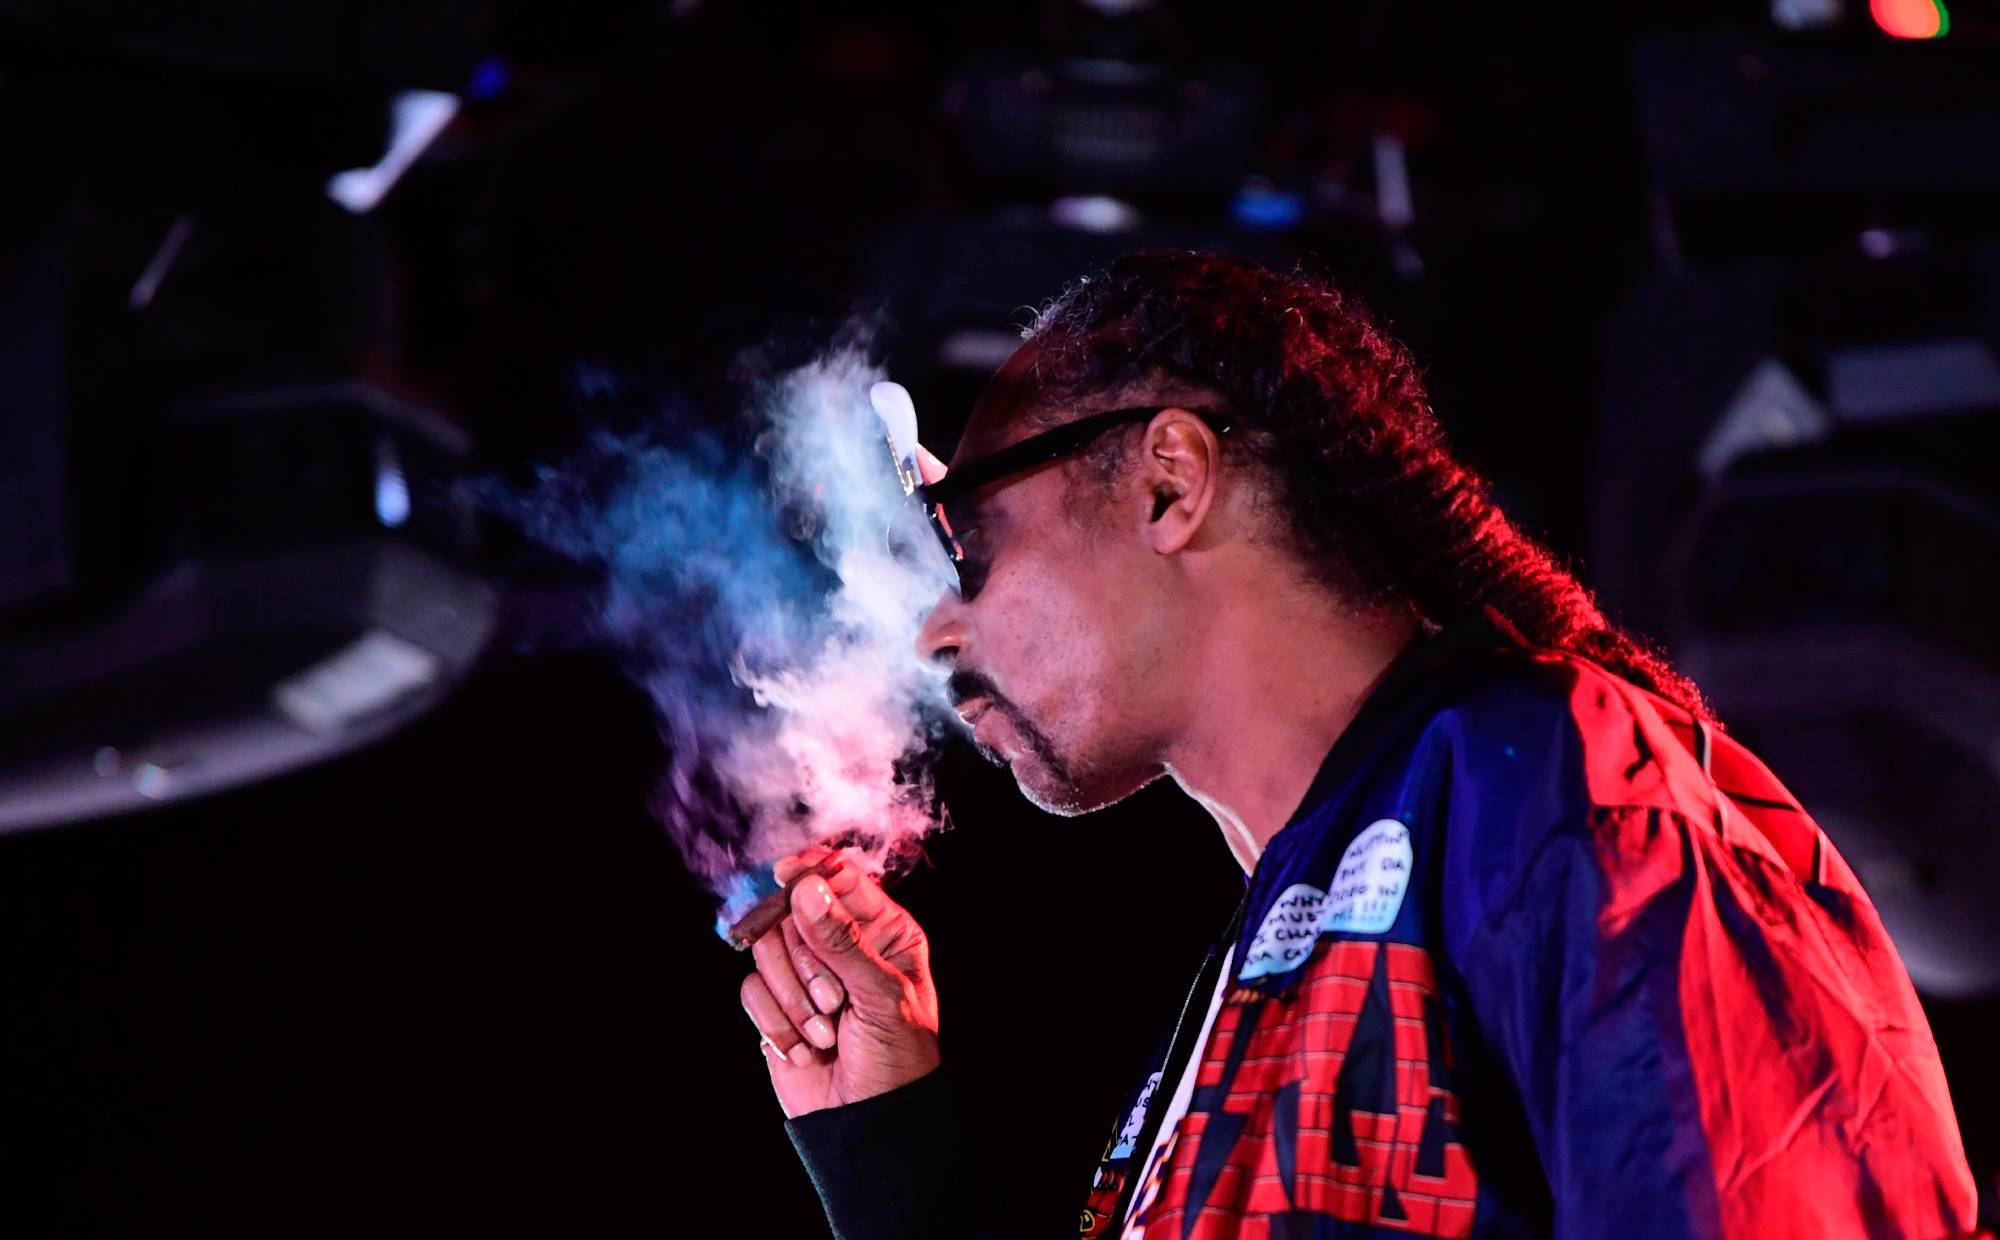 Snoop Dogg smokes while performing on stage during a 